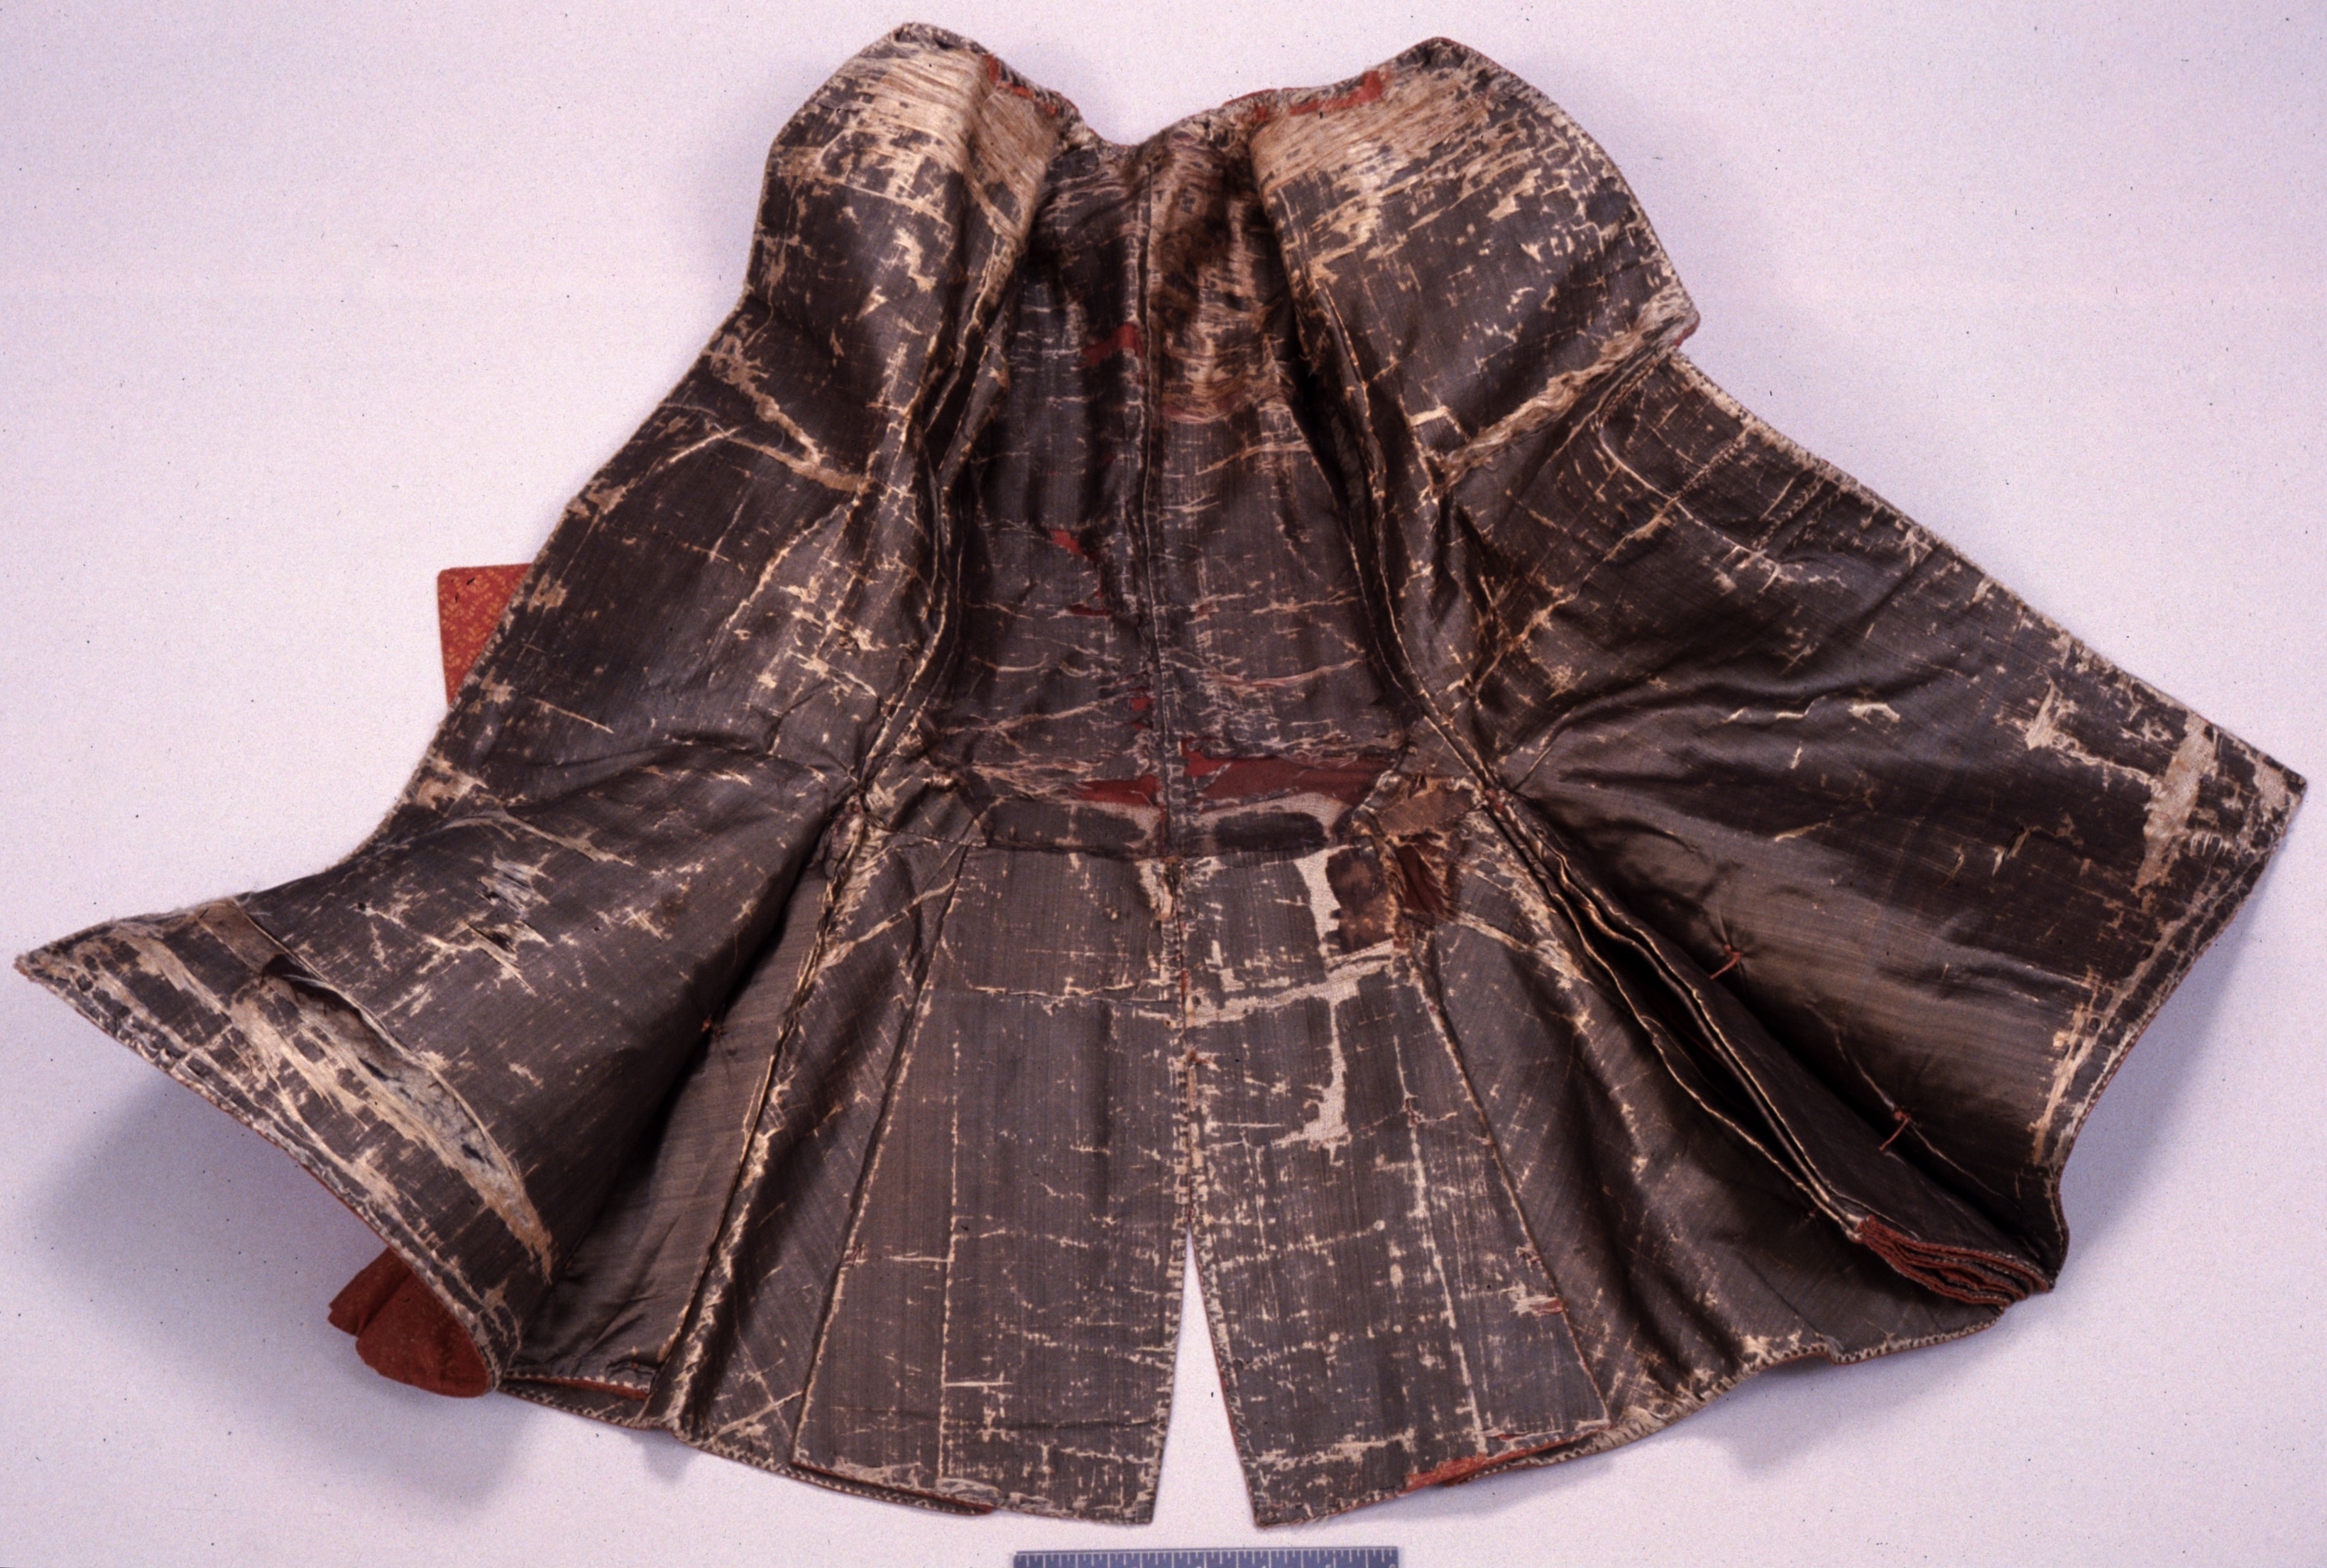 Boy's Coat (interior—lining after stabilization), Italy, 1720–30, Los Angeles County Museum of Art, gift of Sanford and Mary Jane Bloom, photo by Catherine McLean